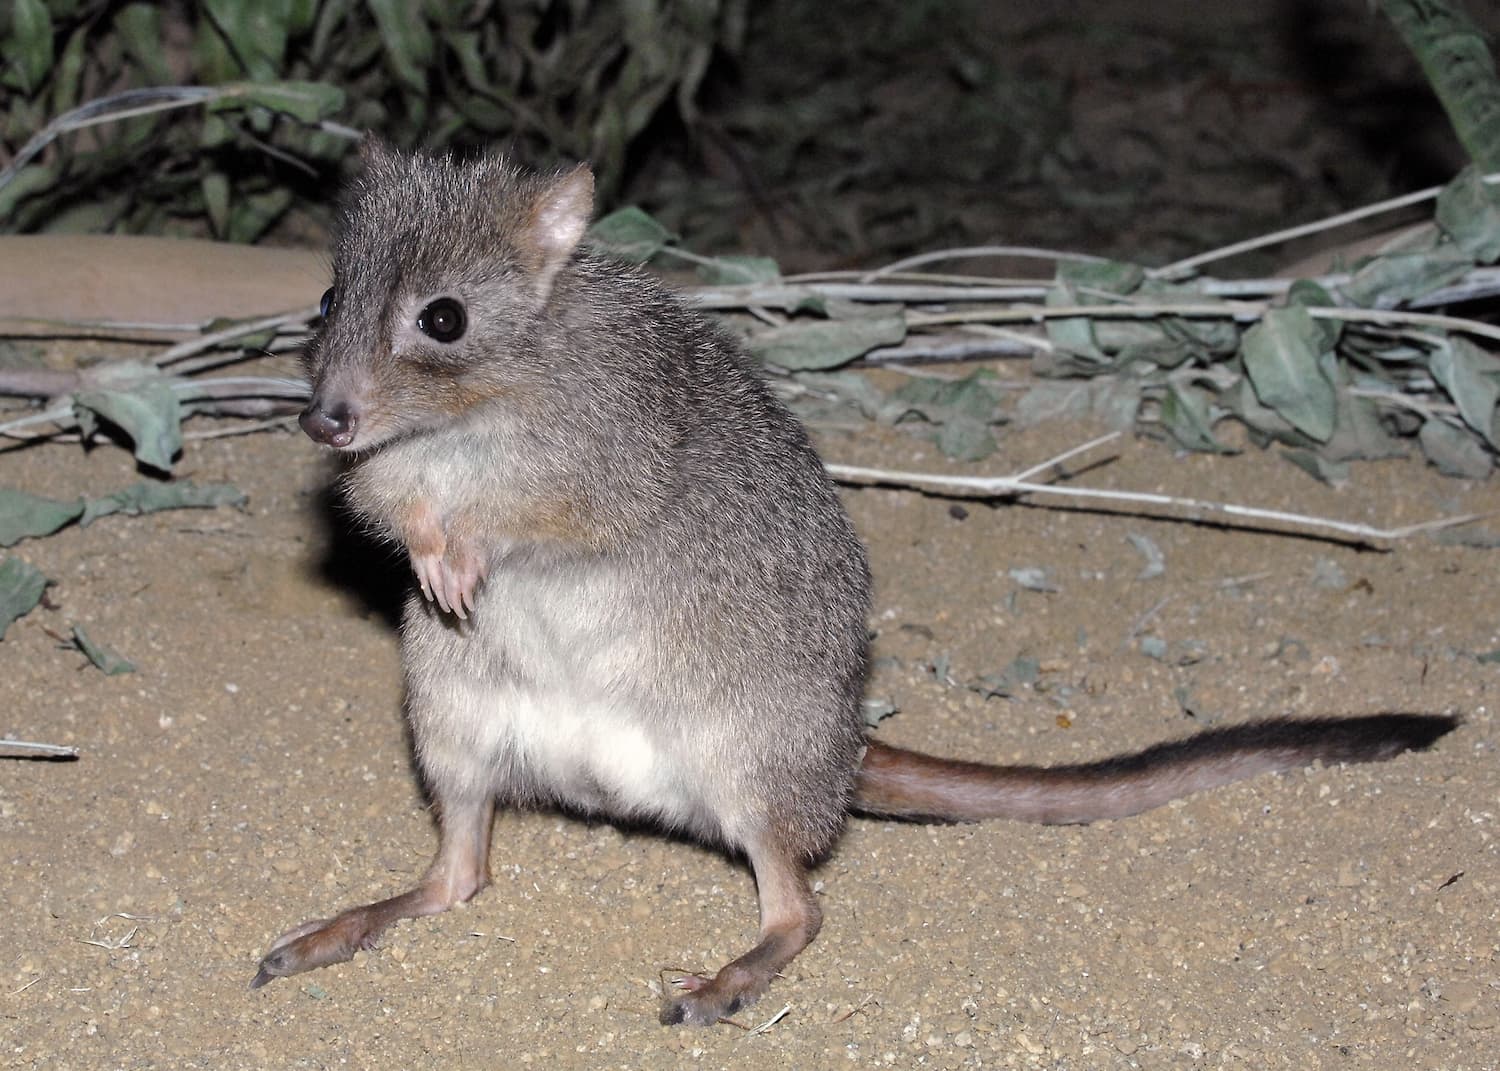 Bettong standing on its hind legs.